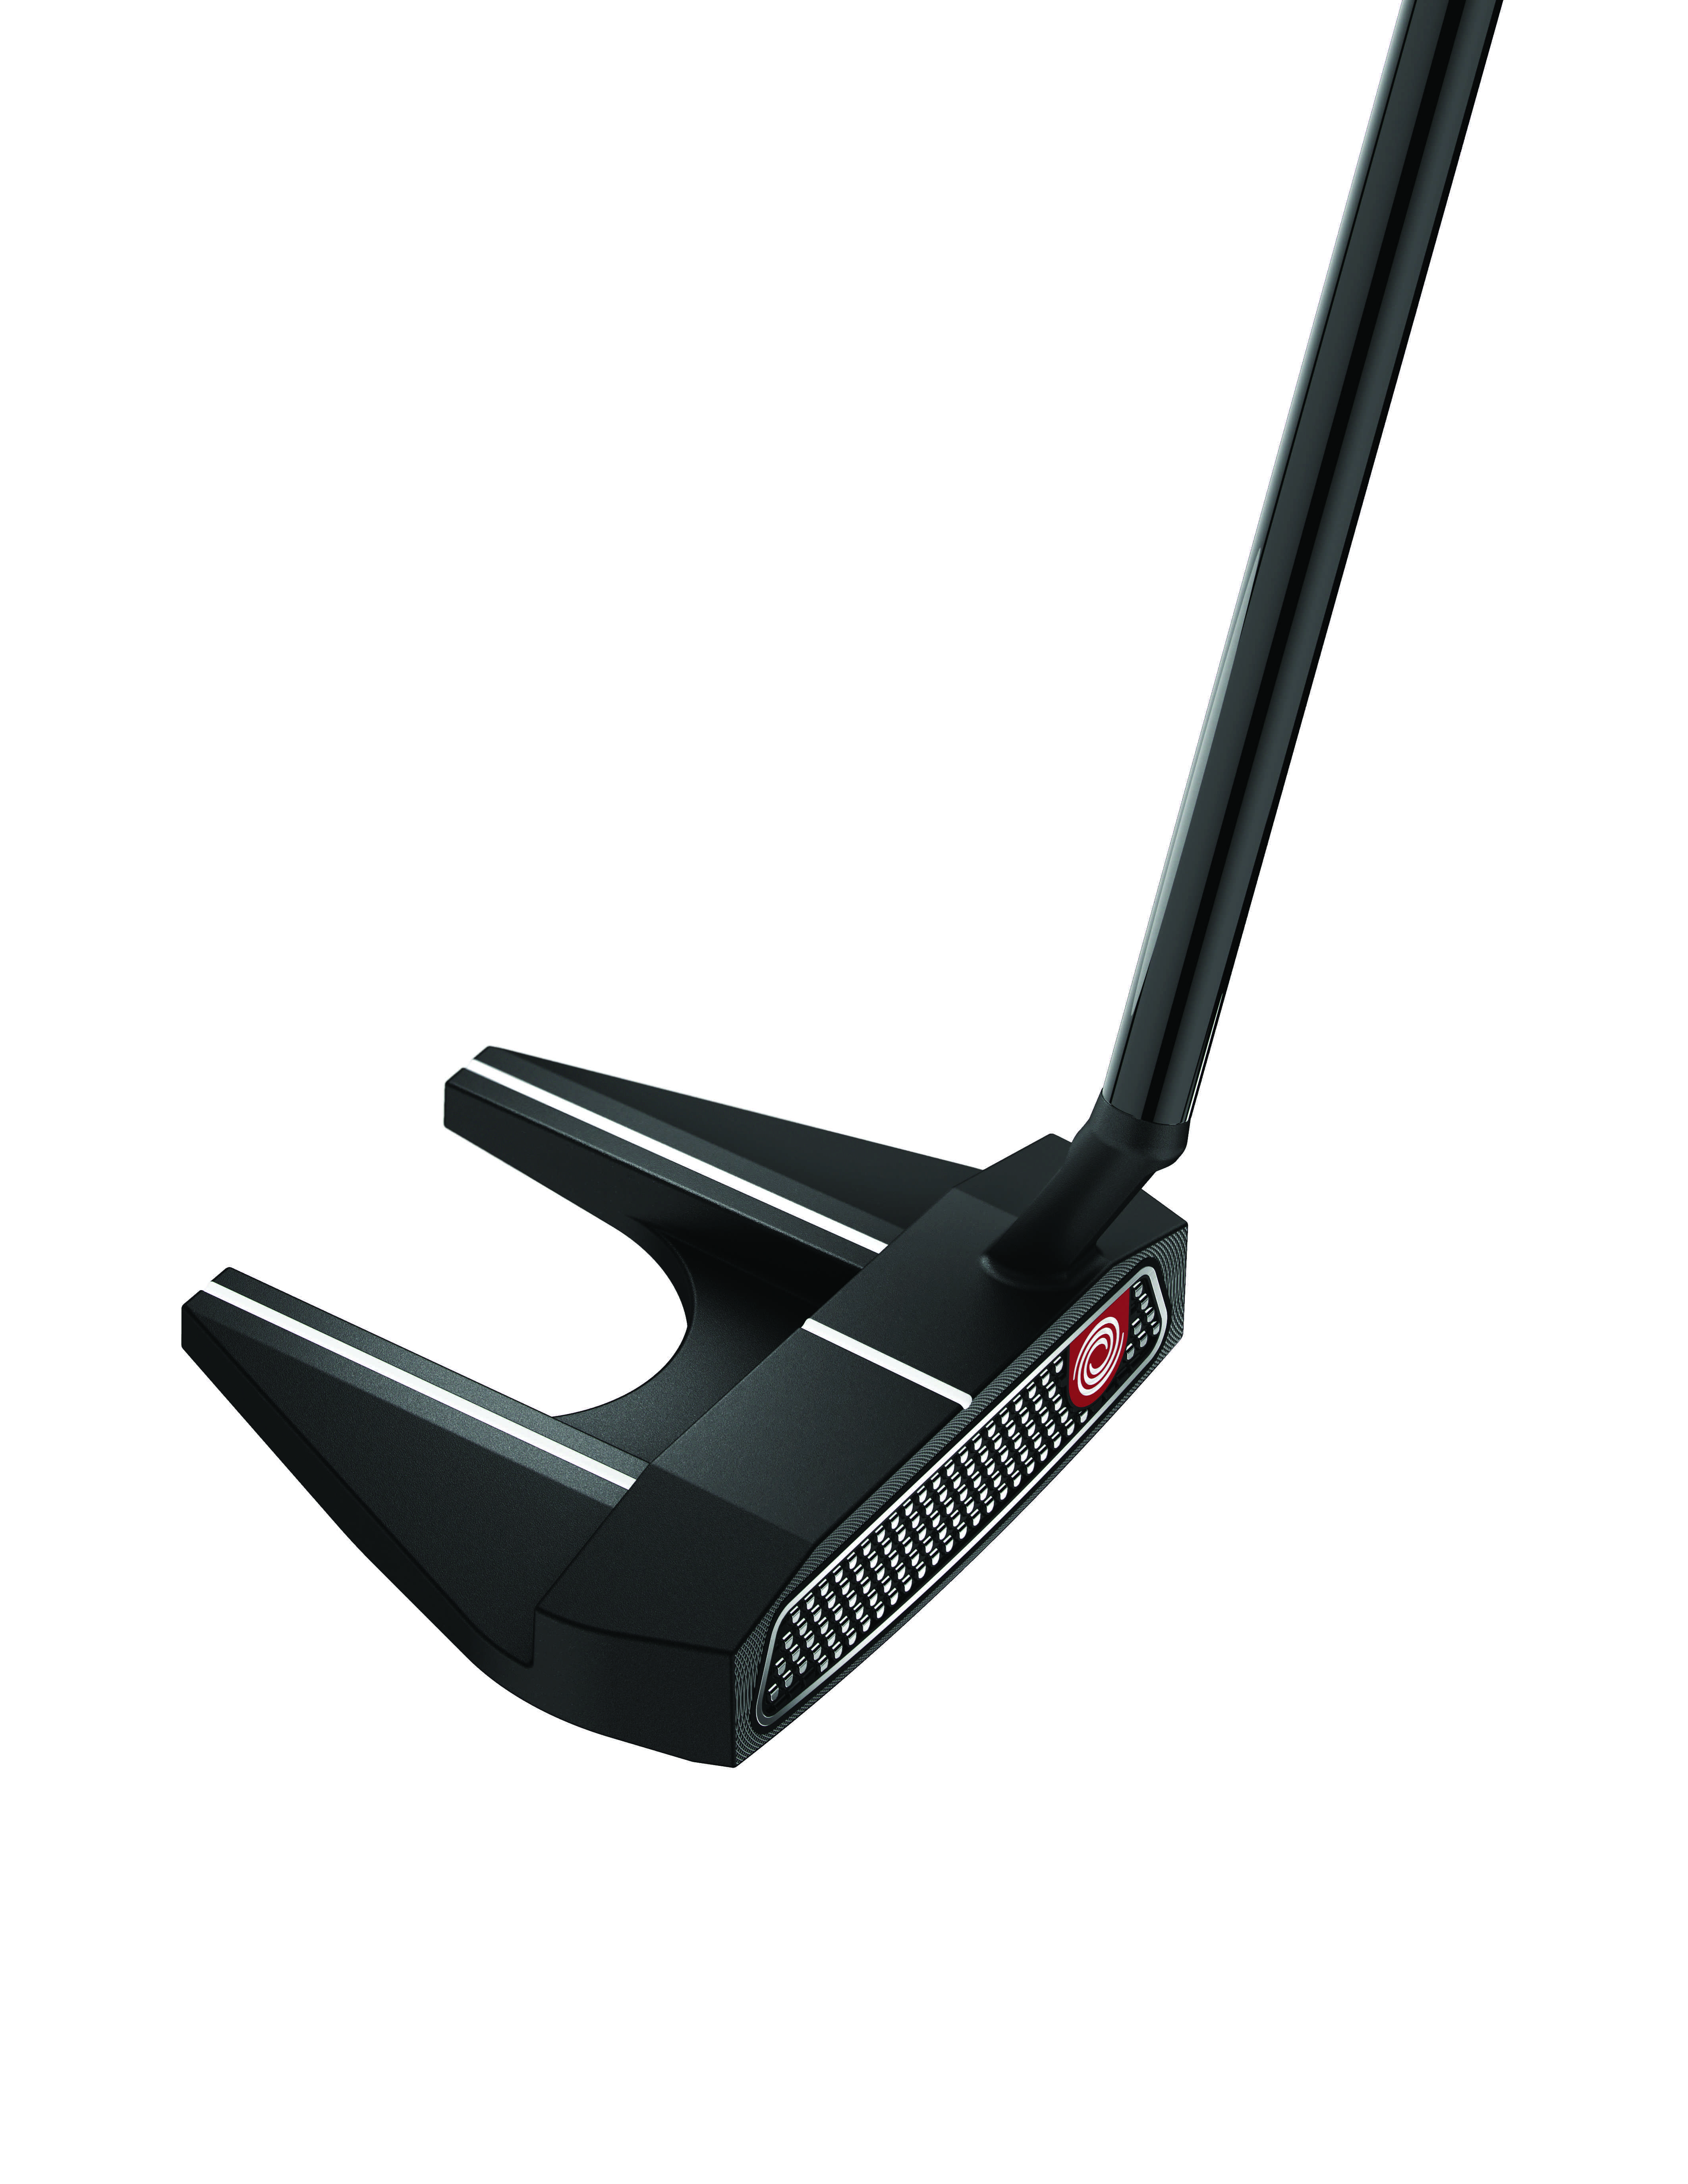 New Odyssey O-Works putters now feature black and red models